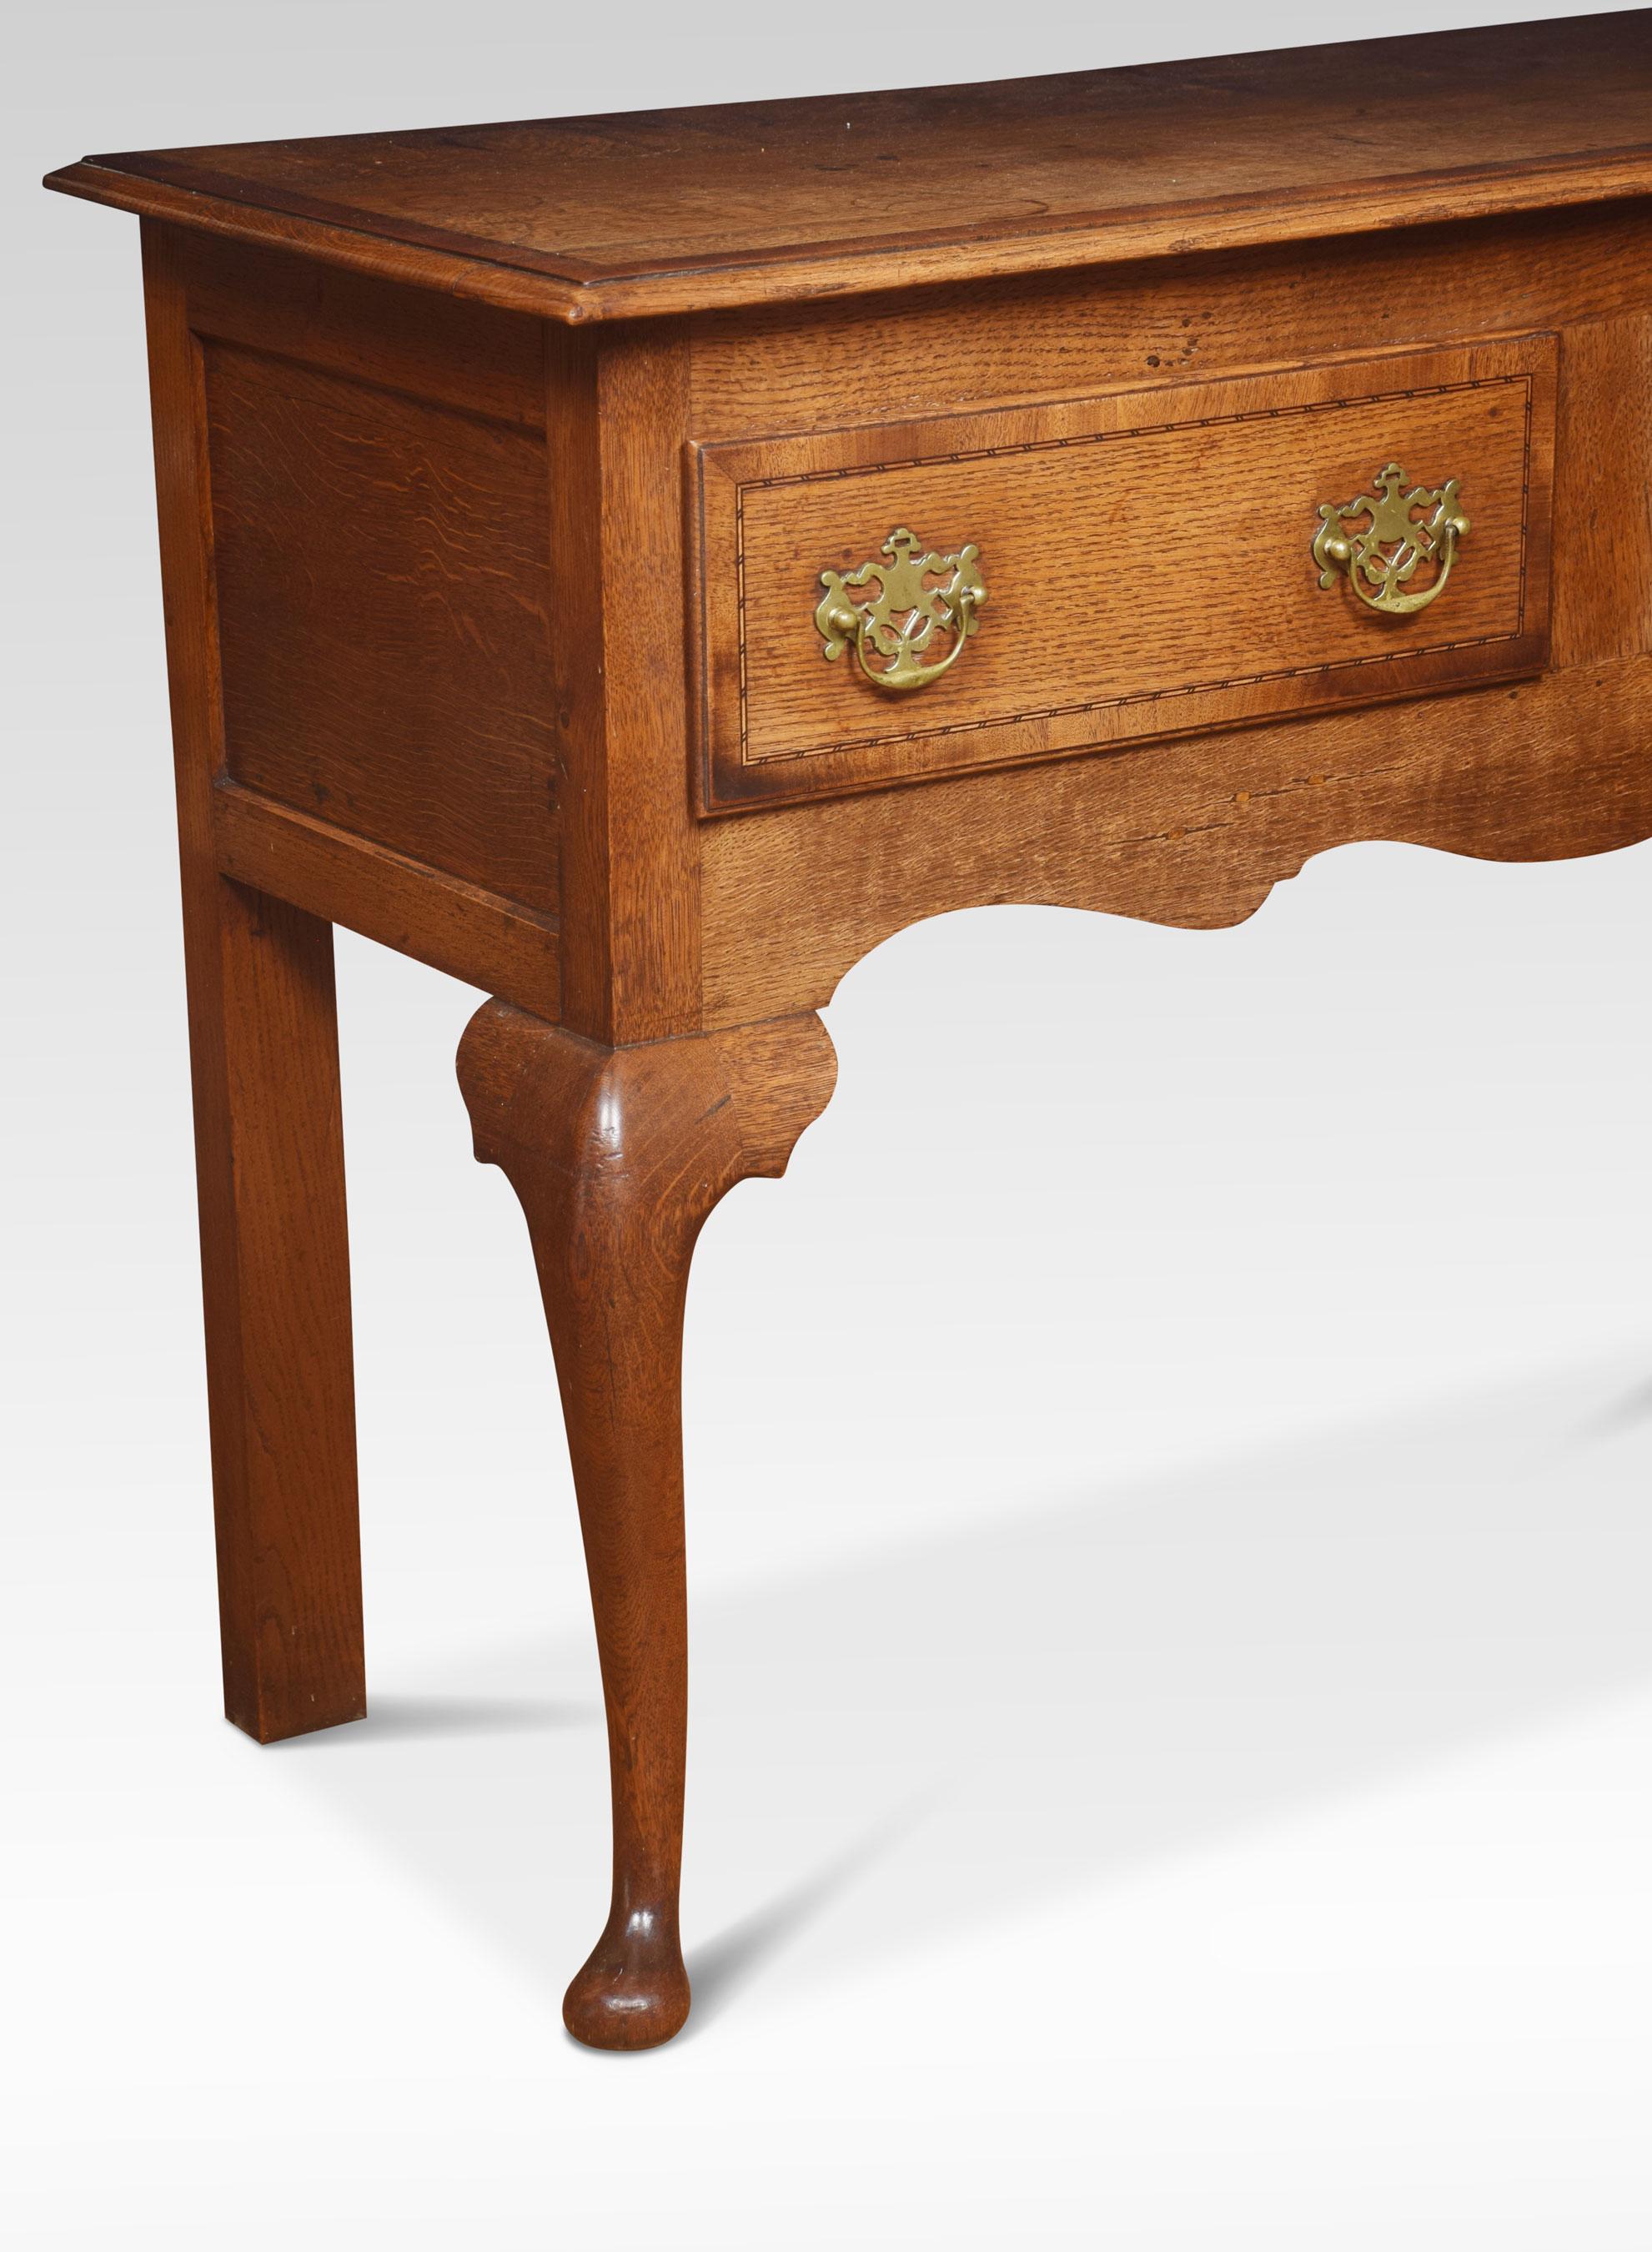 Oak dresser the large rectangular top with crossbanded border and molded edge. To the frieze fitted with two drawers having brass swan neck handles. All raised up on slender cabriole supports terminating in pad feet.
Dimensions
Height 32.5